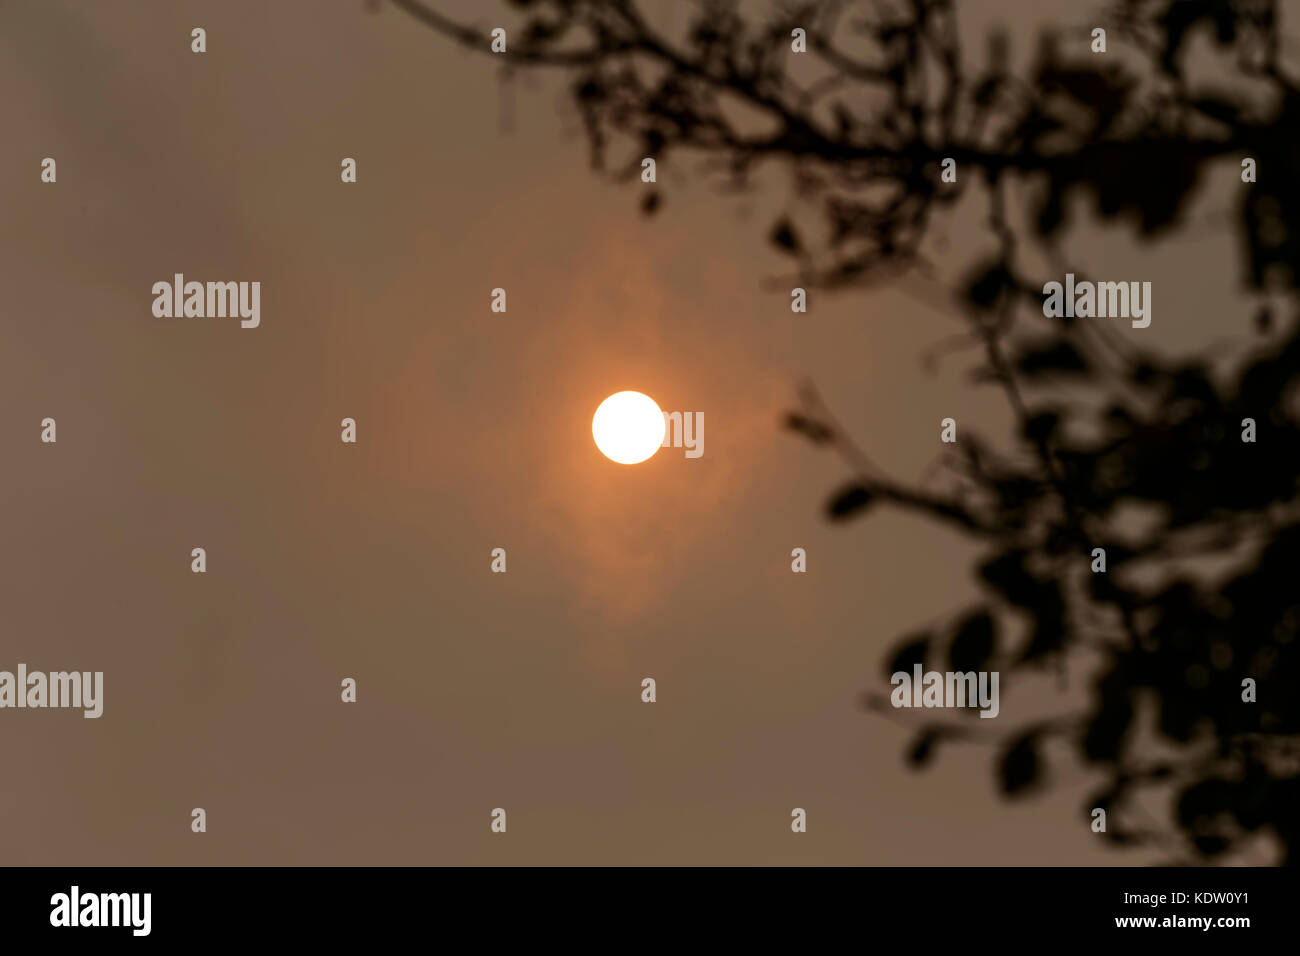 Warminster, Wiltshire, UK. 16th Oct, 2017. Hurricane Ophelia creates an orange sun over Warminster in Wiltshire when the storm is believed to have picked up dust from the Sahara and debris from forest fires in Spain and Portugal. Credit: Andrew Harker/Alamy Live News Stock Photo